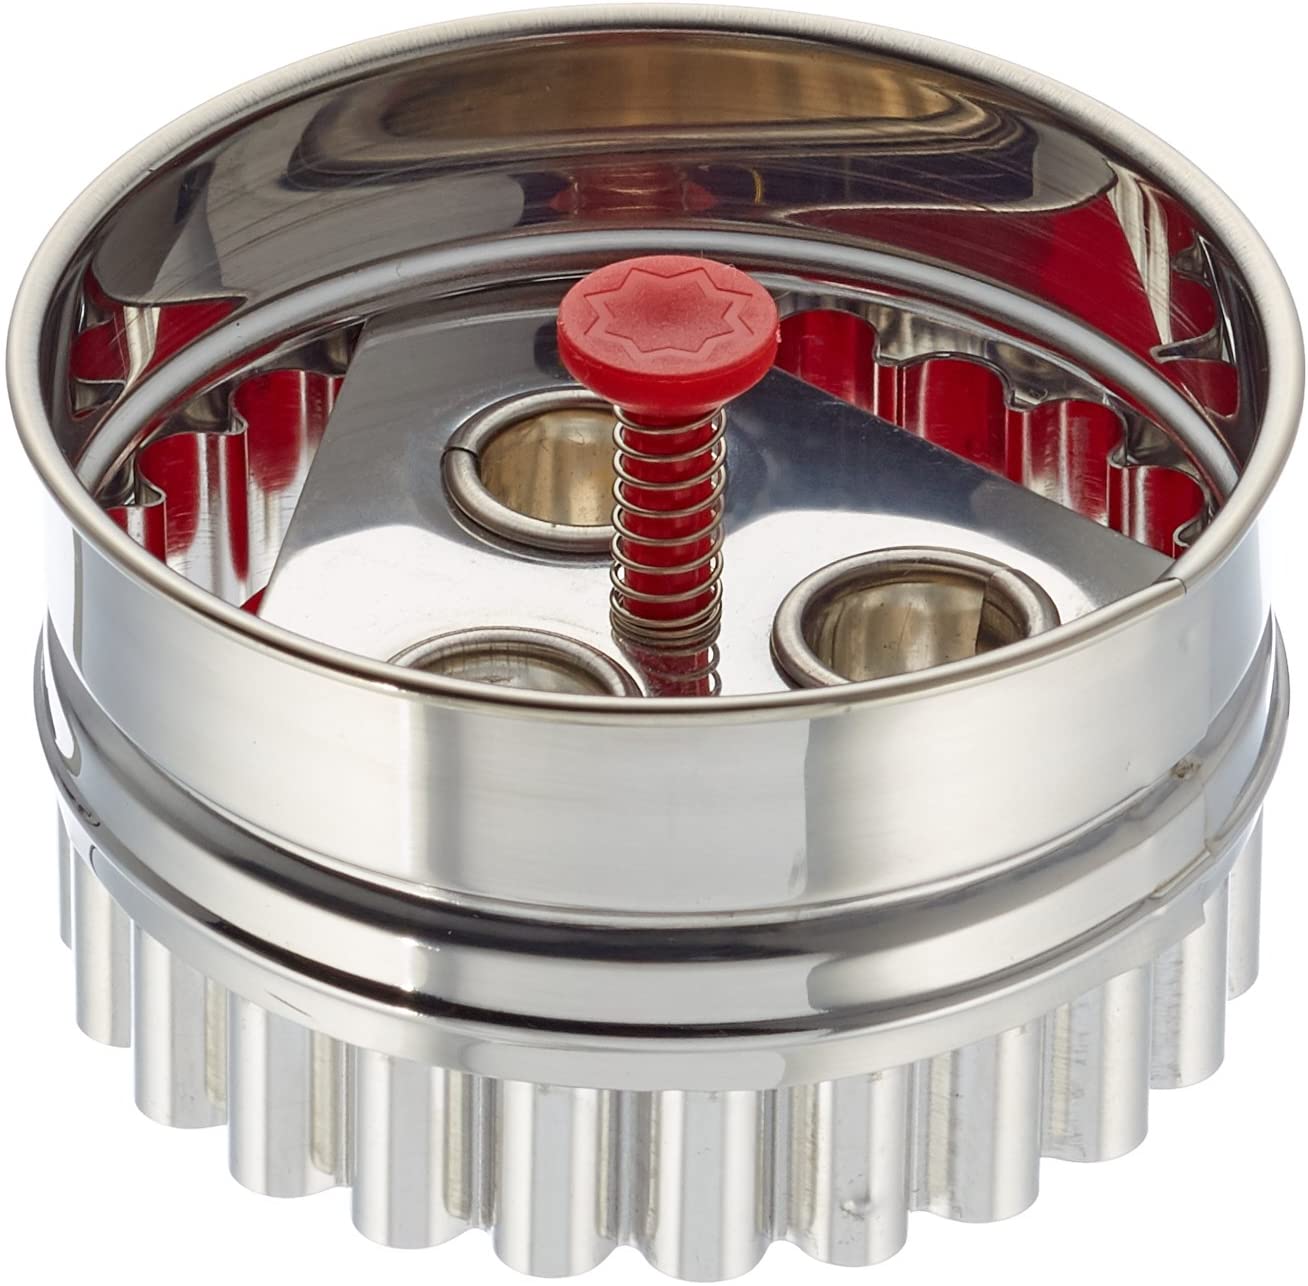 Staedter Städter 966339 Large Linzer Cookie Cutter with Ejector, 3 Holes, Stainless Steel, Silver/Red, 6.5 x 6.5 x 4 cm